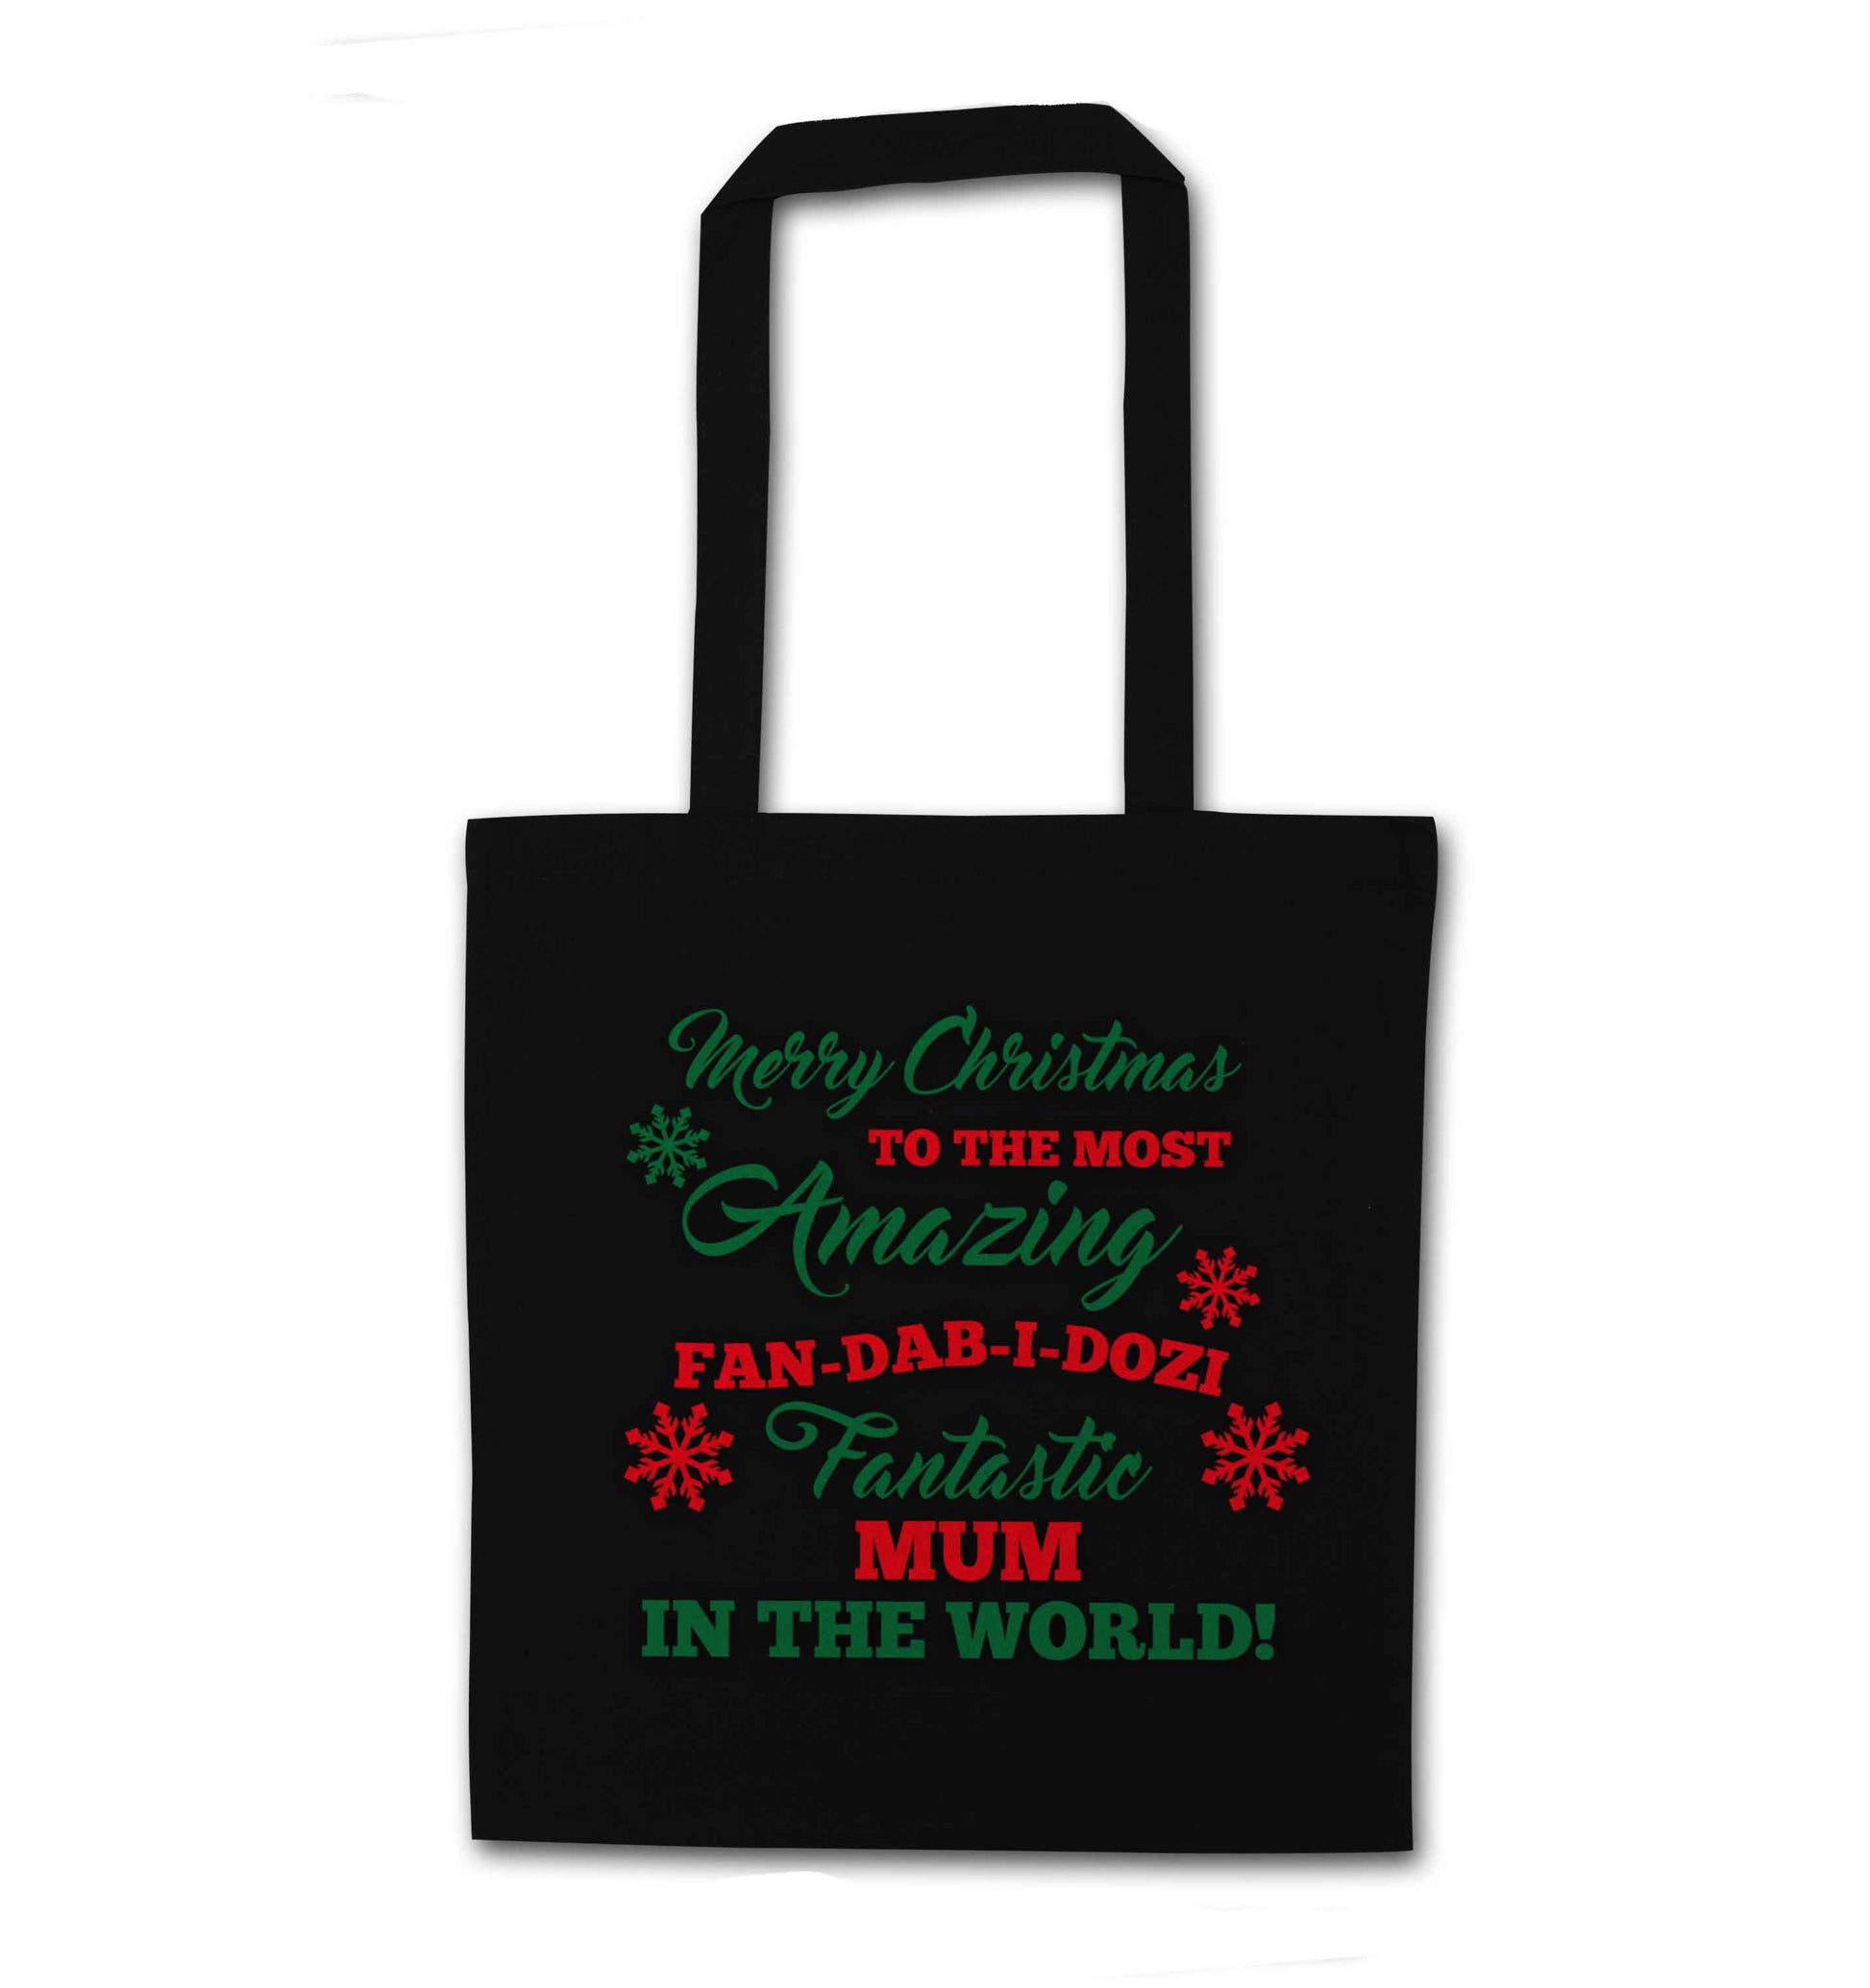 Merry Christmas to the most amazing fan-dab-i-dozi fantasic mum in the world black tote bag